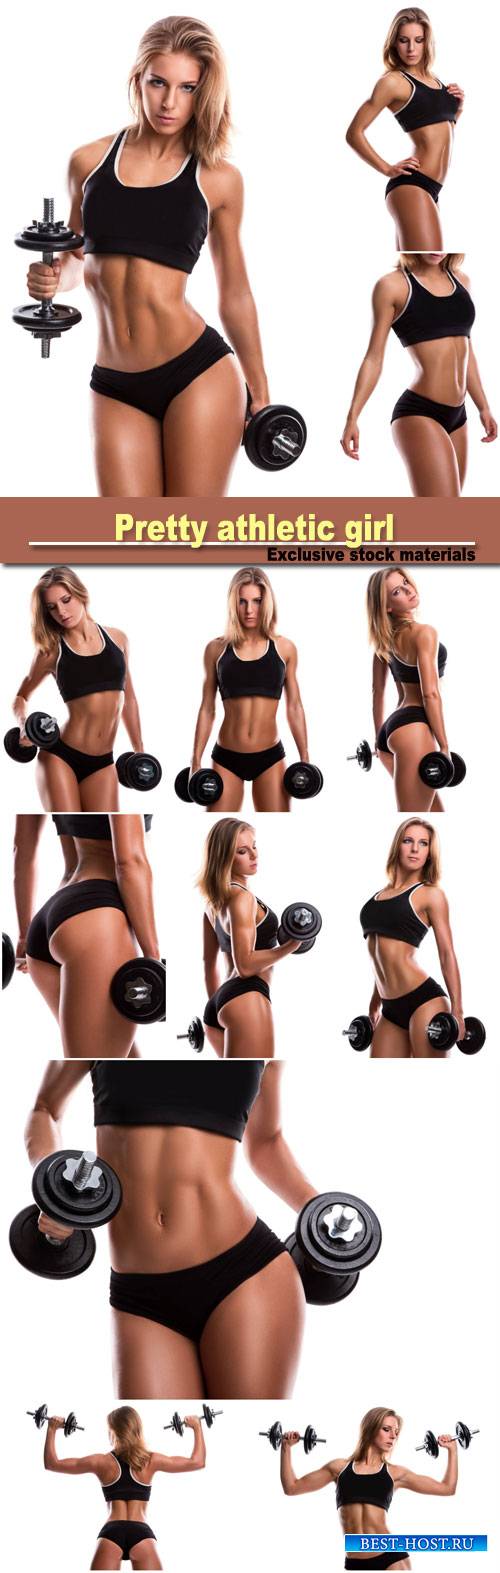 Pretty athletic girl with dumbbells